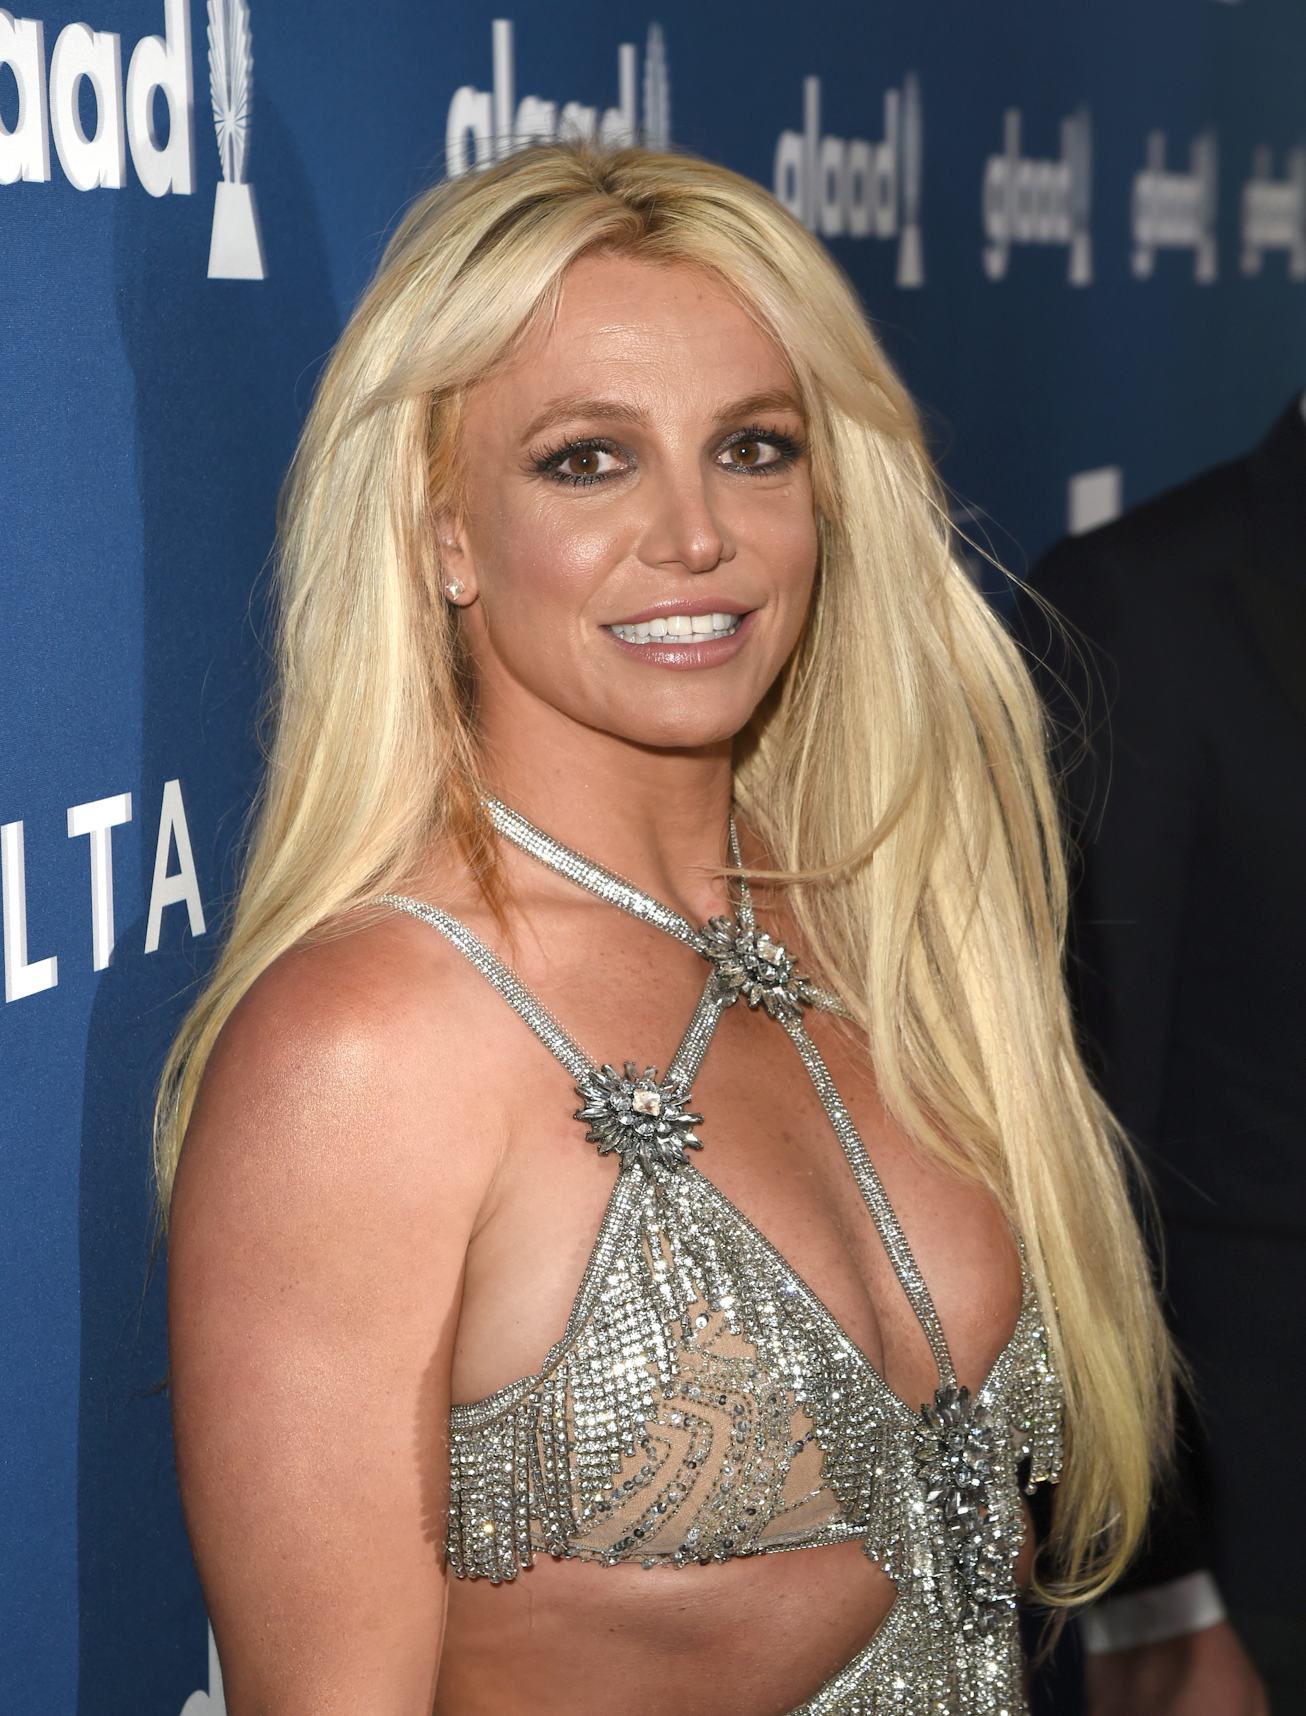 Britney Spears seemed to respond in a social media post to the NYT 'Framing Britney Spears' document...